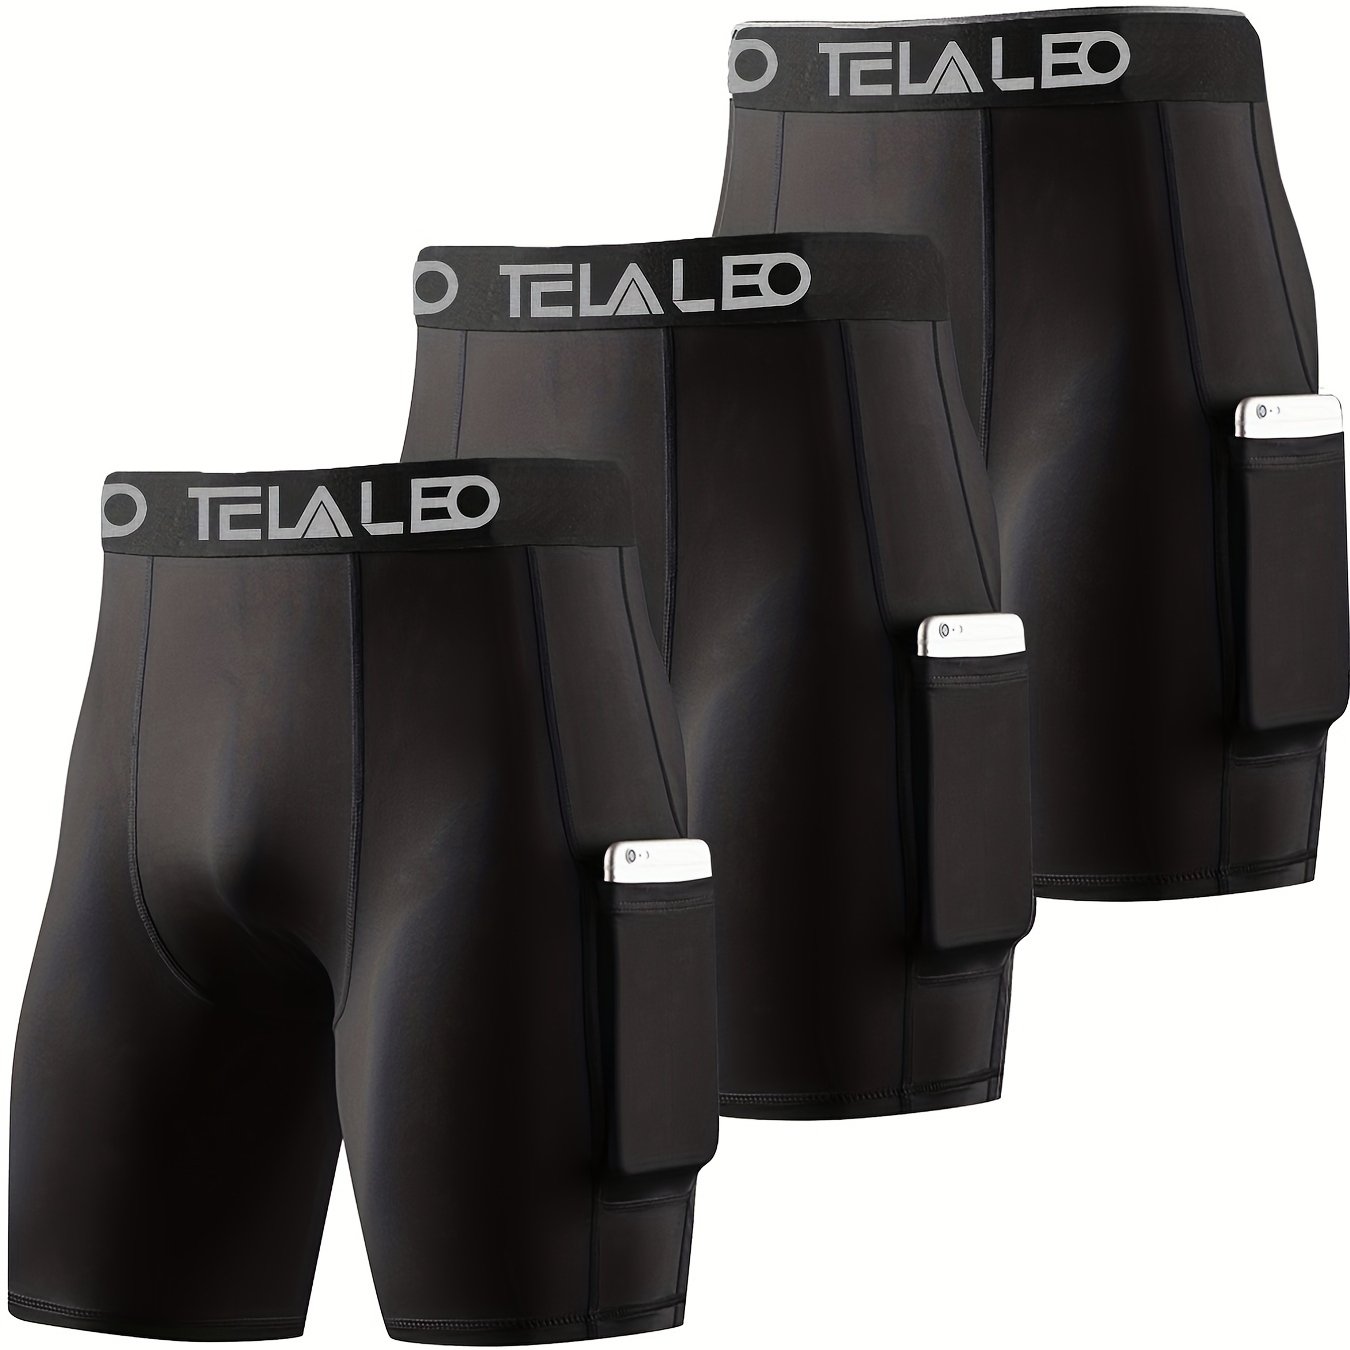 TELALEO 5 Pack 3 Womens Volleyball Shorts Spandex Compression